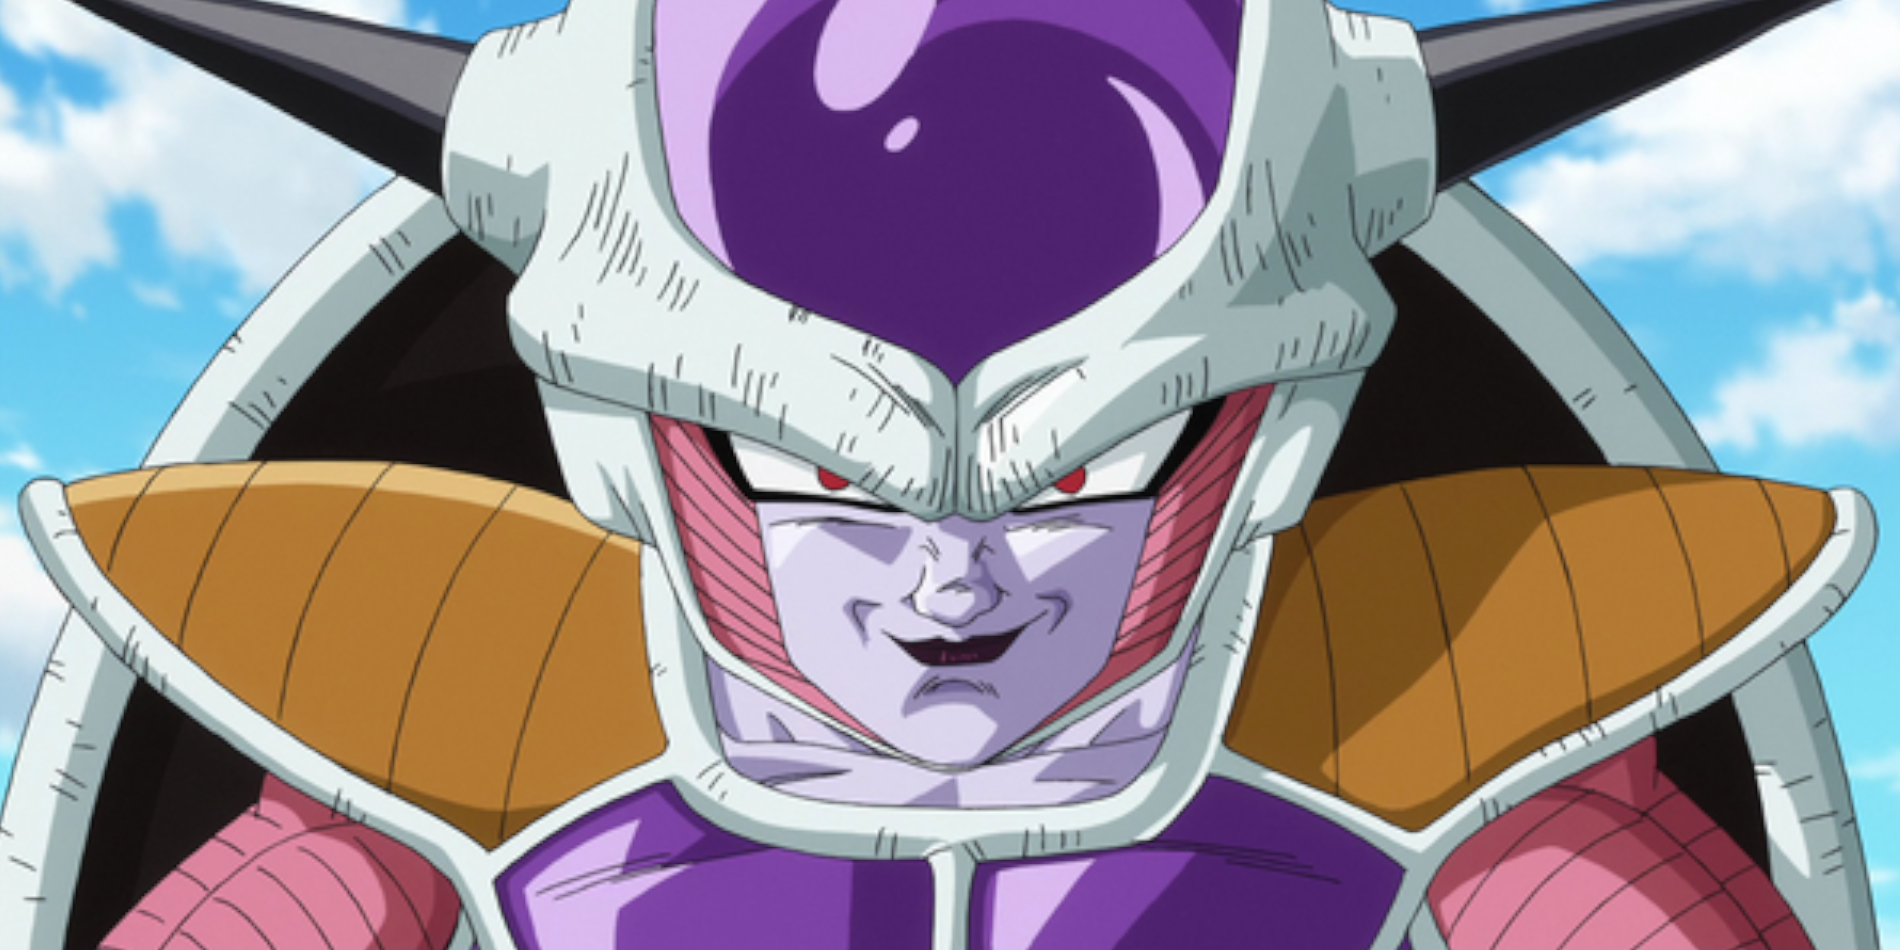 Frieza in his 1st Form